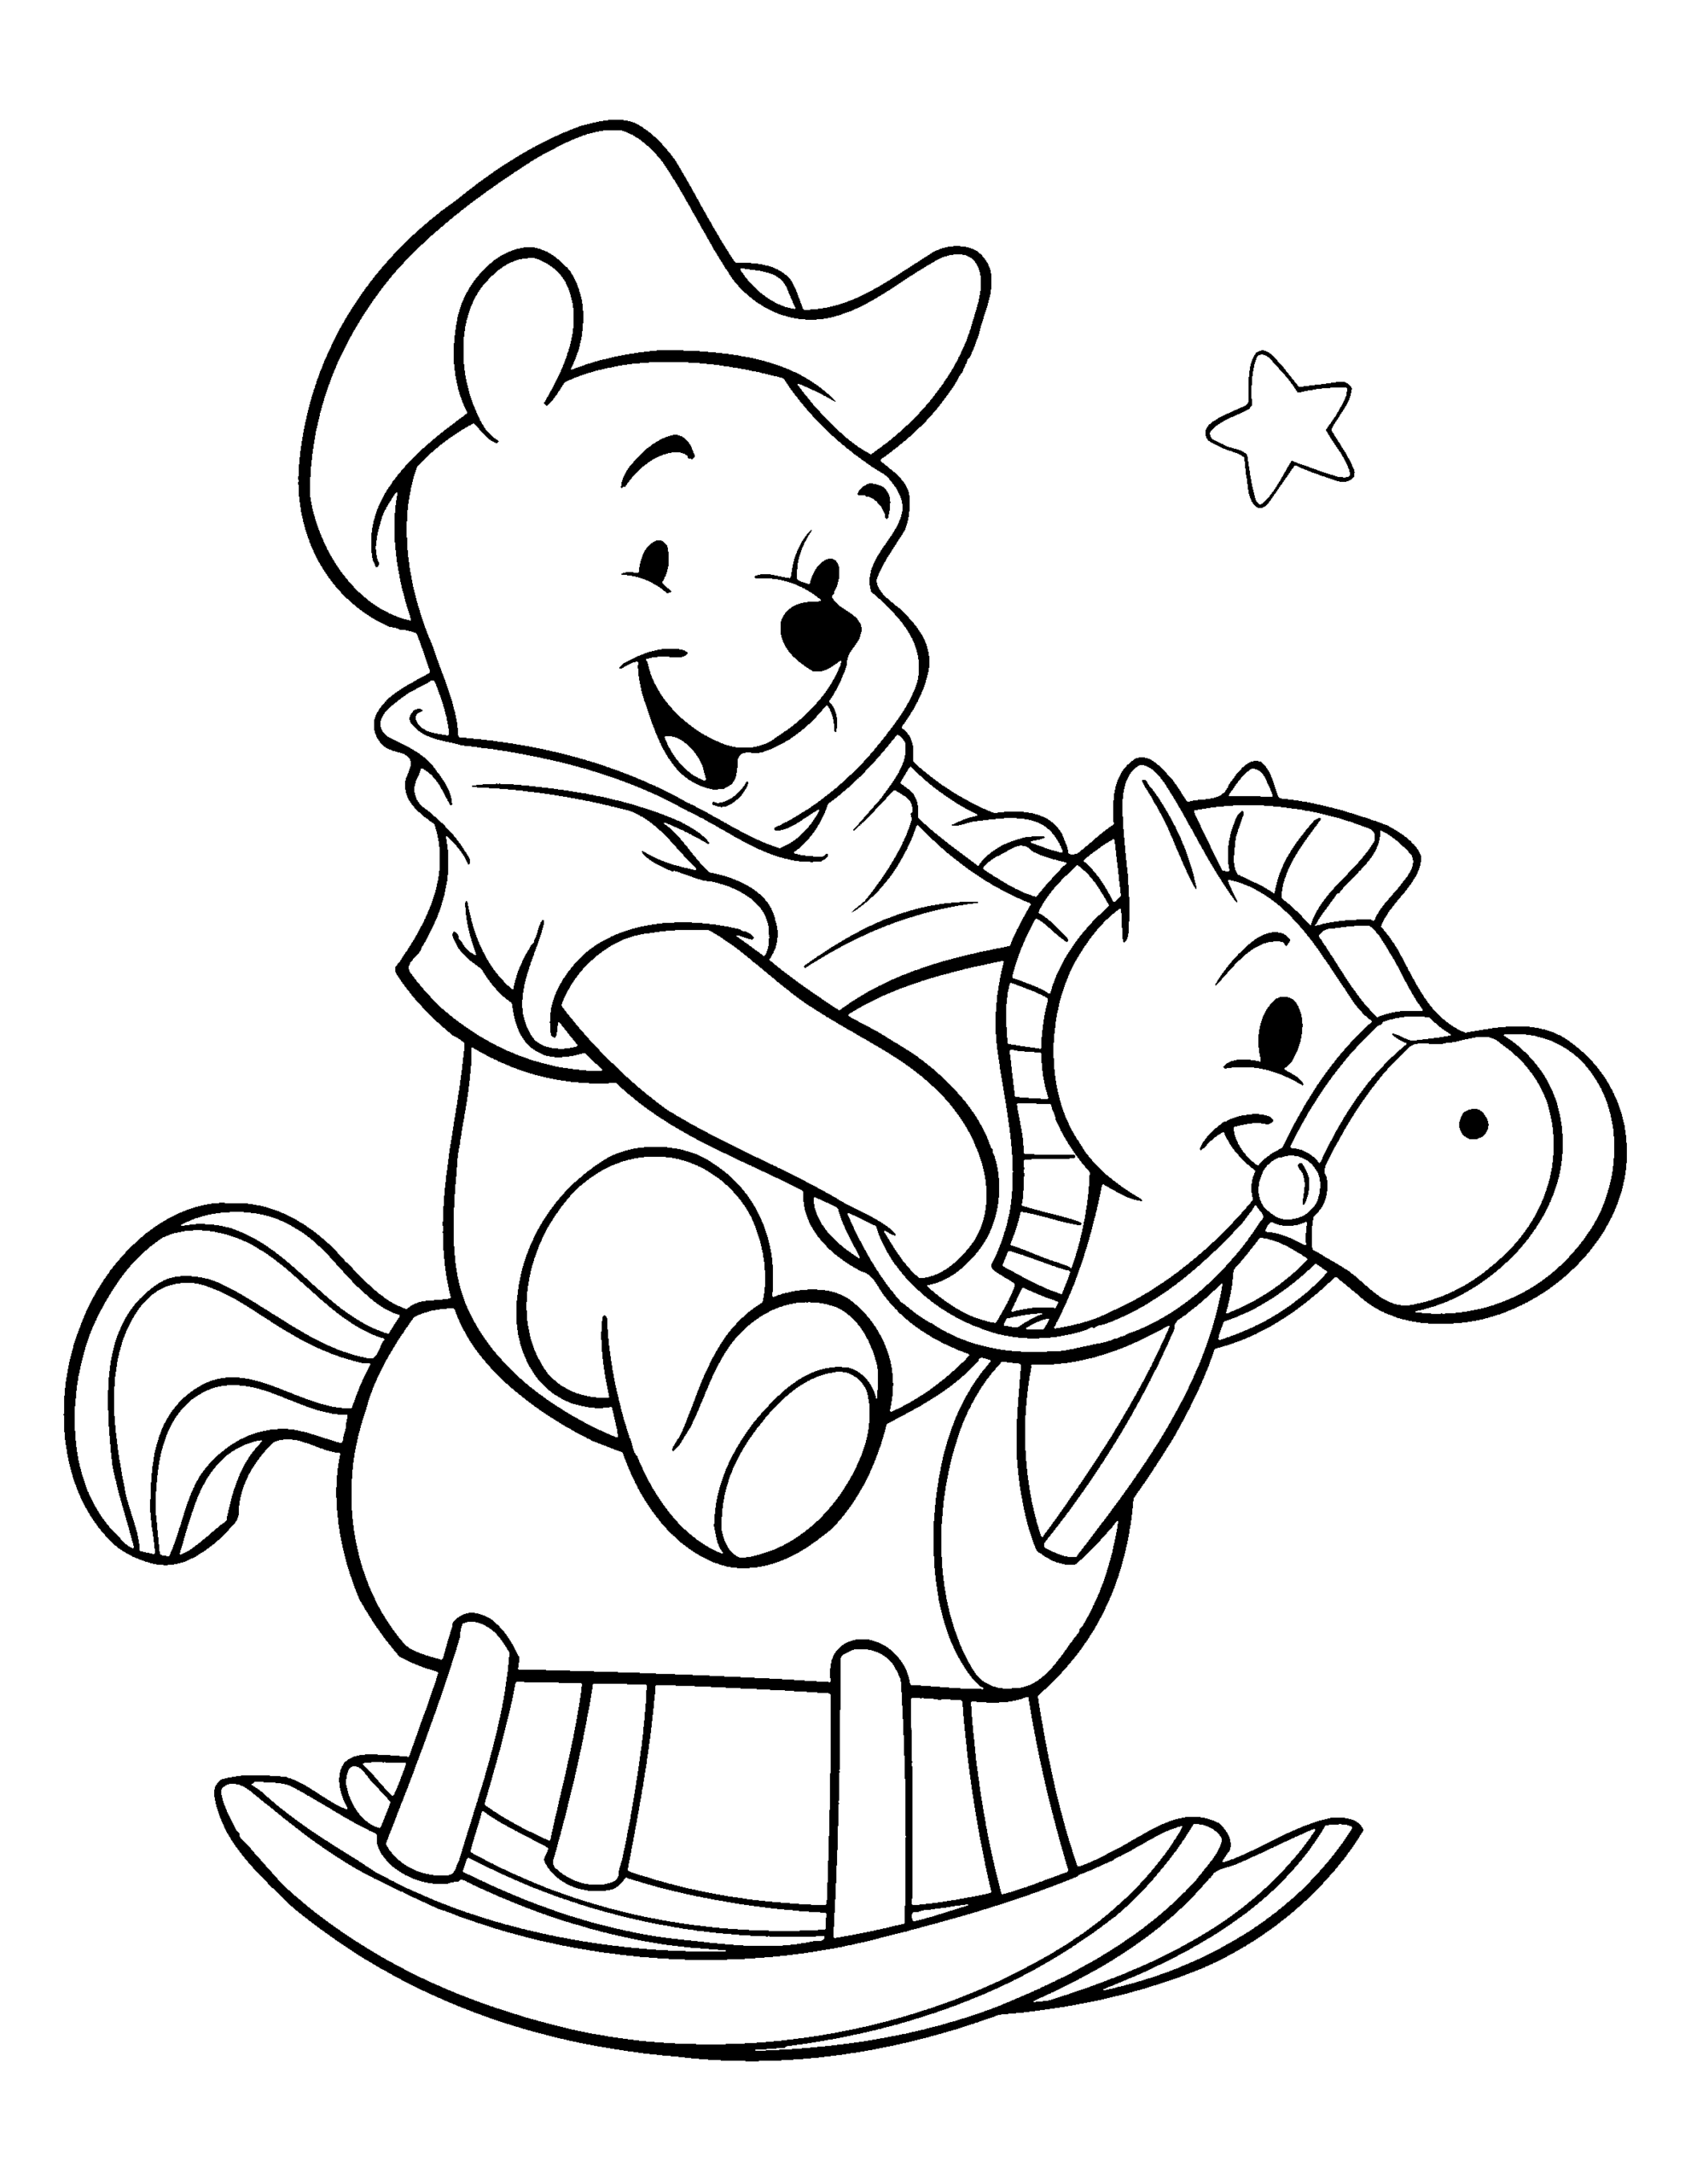 Winnie the Pooh Coloring Pages Cartoons_pooh playing wooden rocking horse Printable 2020 6922 Coloring4free